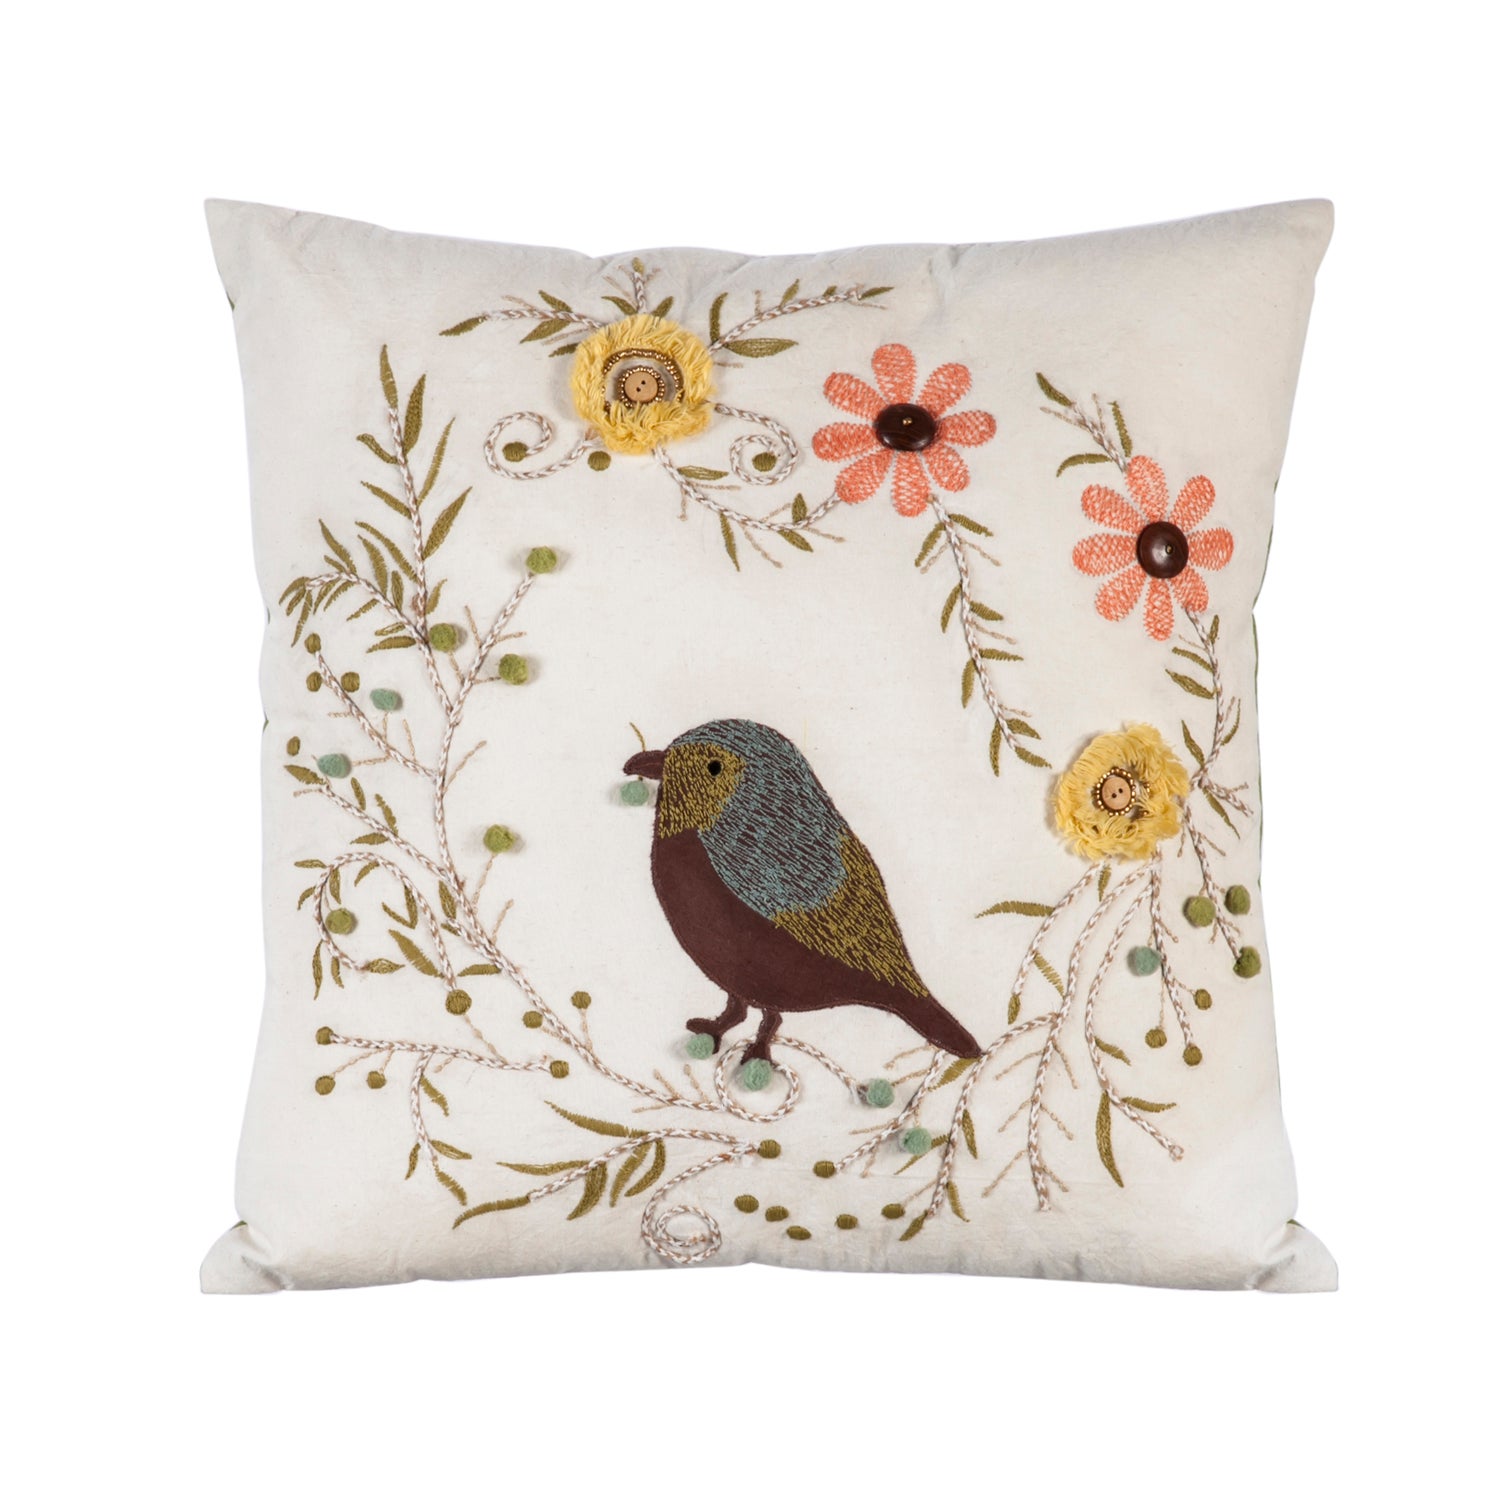 White Square Pillow with Bird and Flowers